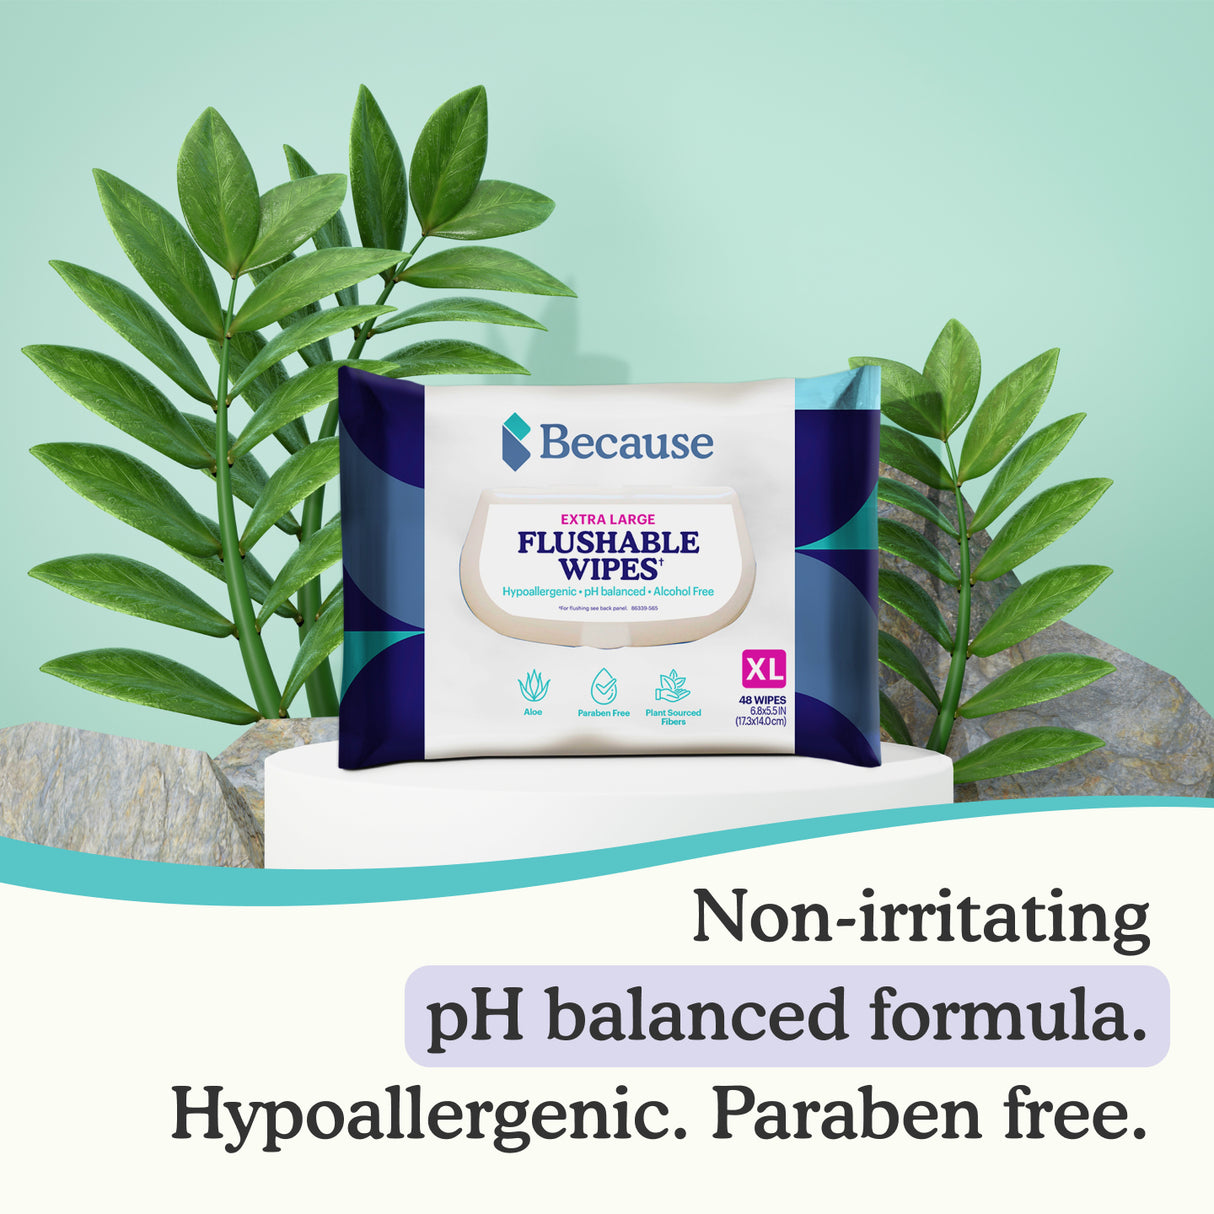 Extra Large Flushable Wipes package with the text: Non-irritating pH balanced formula. Hypoallergenic. Paraben free.